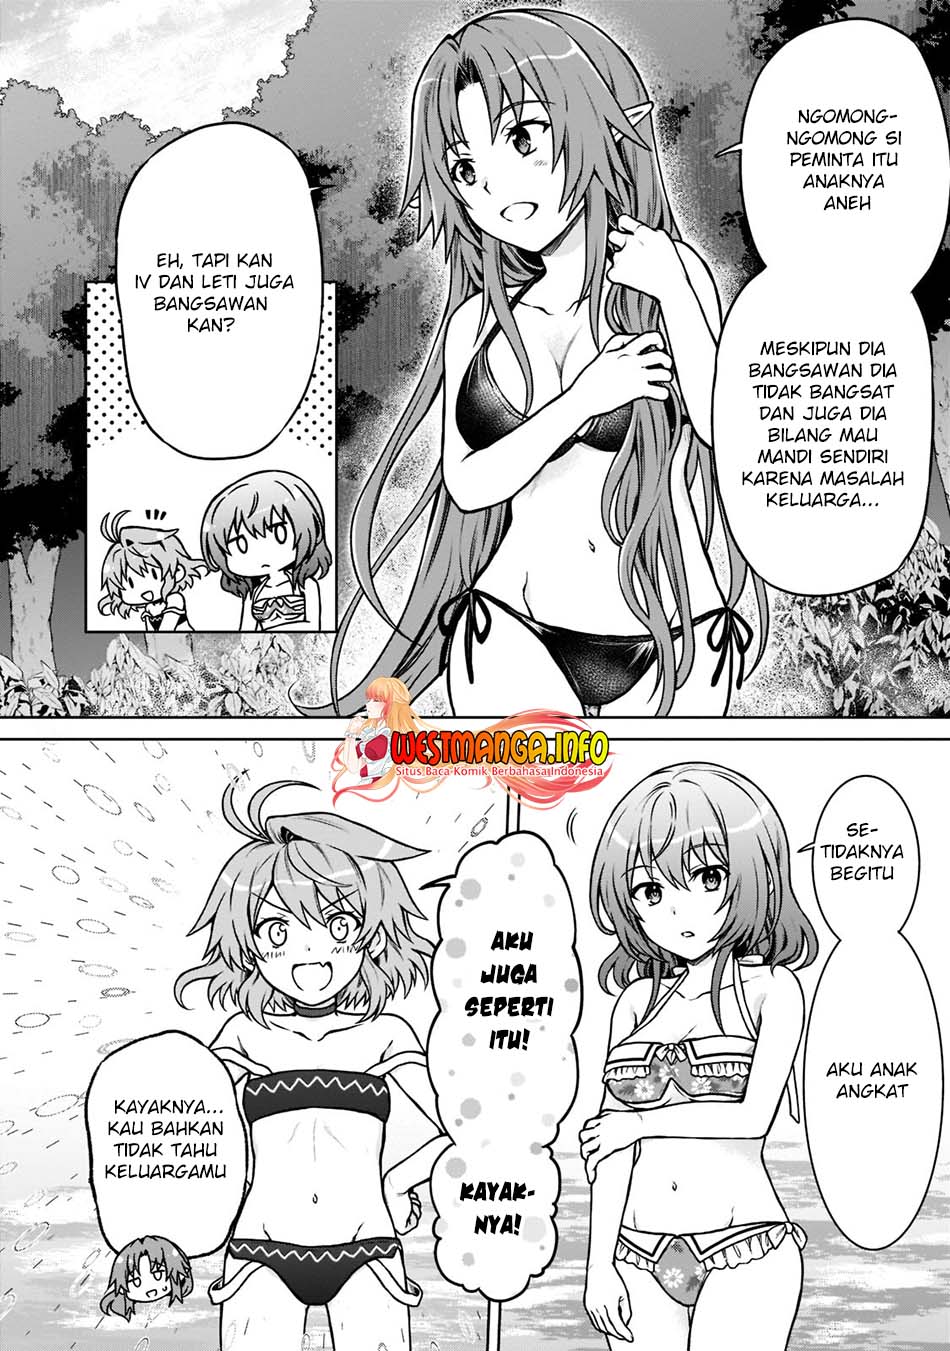 Dilarang COPAS - situs resmi www.mangacanblog.com - Komik d rank adventurer invited by a brave party and the stalking princess 008 - chapter 8 9 Indonesia d rank adventurer invited by a brave party and the stalking princess 008 - chapter 8 Terbaru 6|Baca Manga Komik Indonesia|Mangacan